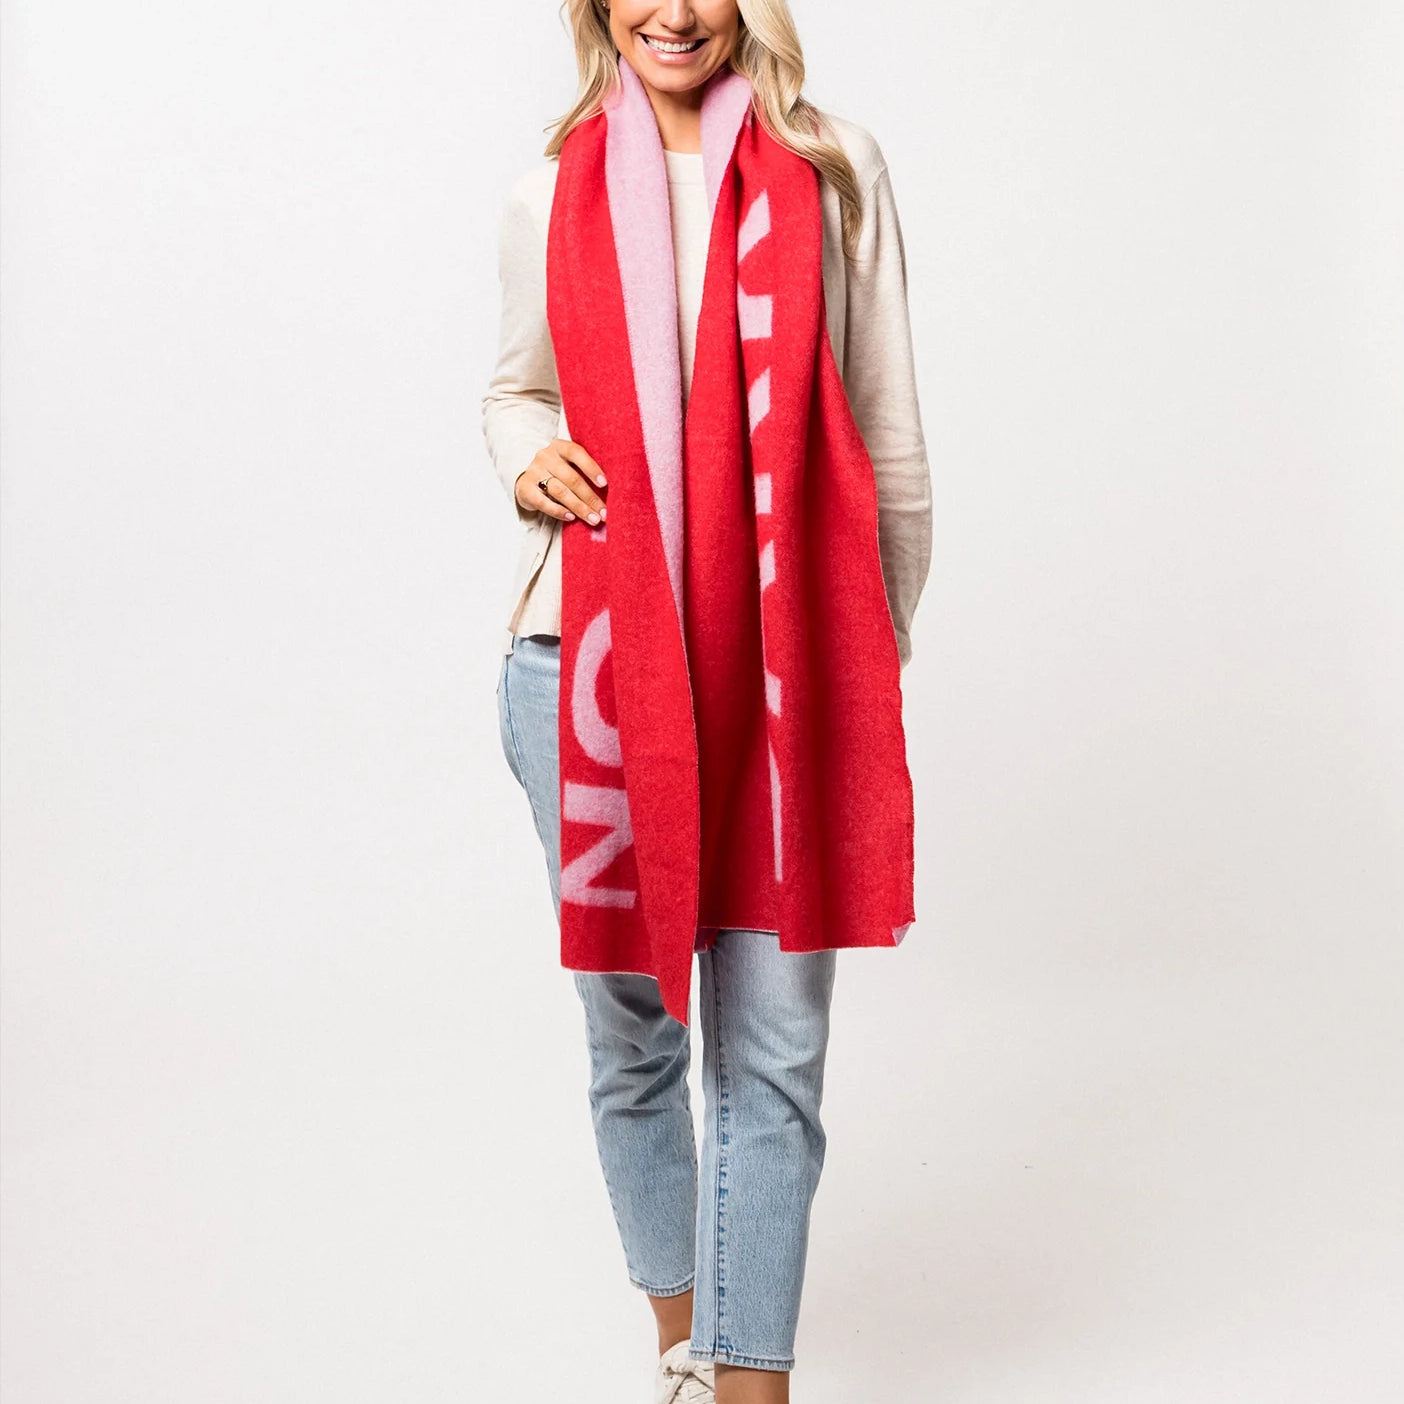 The Baxter Wool Scarf by Dark Hampton - lambswool scarf in red and white